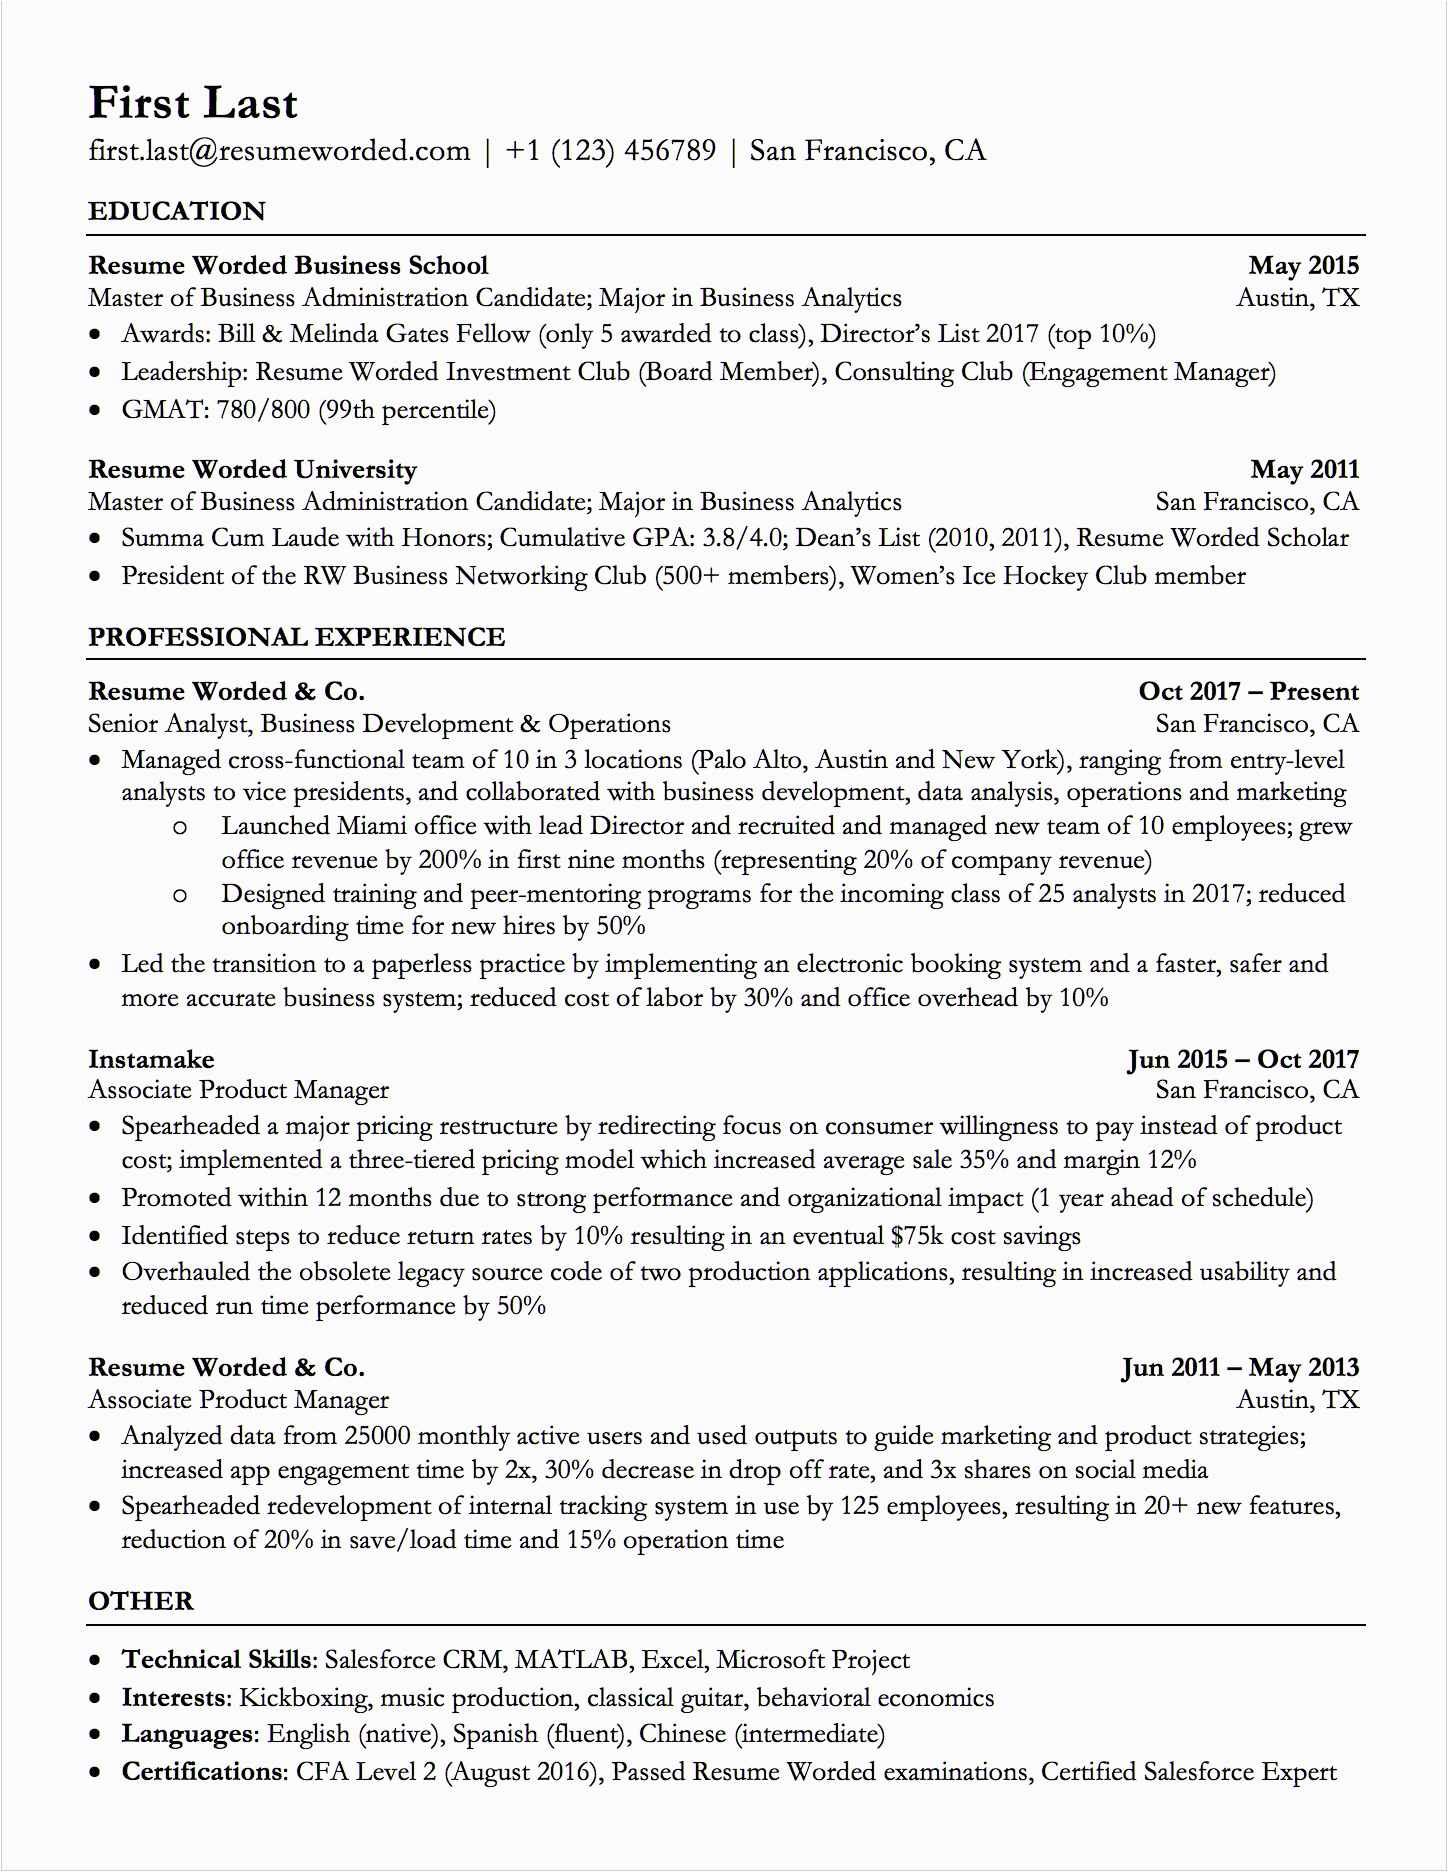 Resume Sample for Recent Graduate with Entry Level Expirience Professional ats Resume Templates for Experienced Hires and College